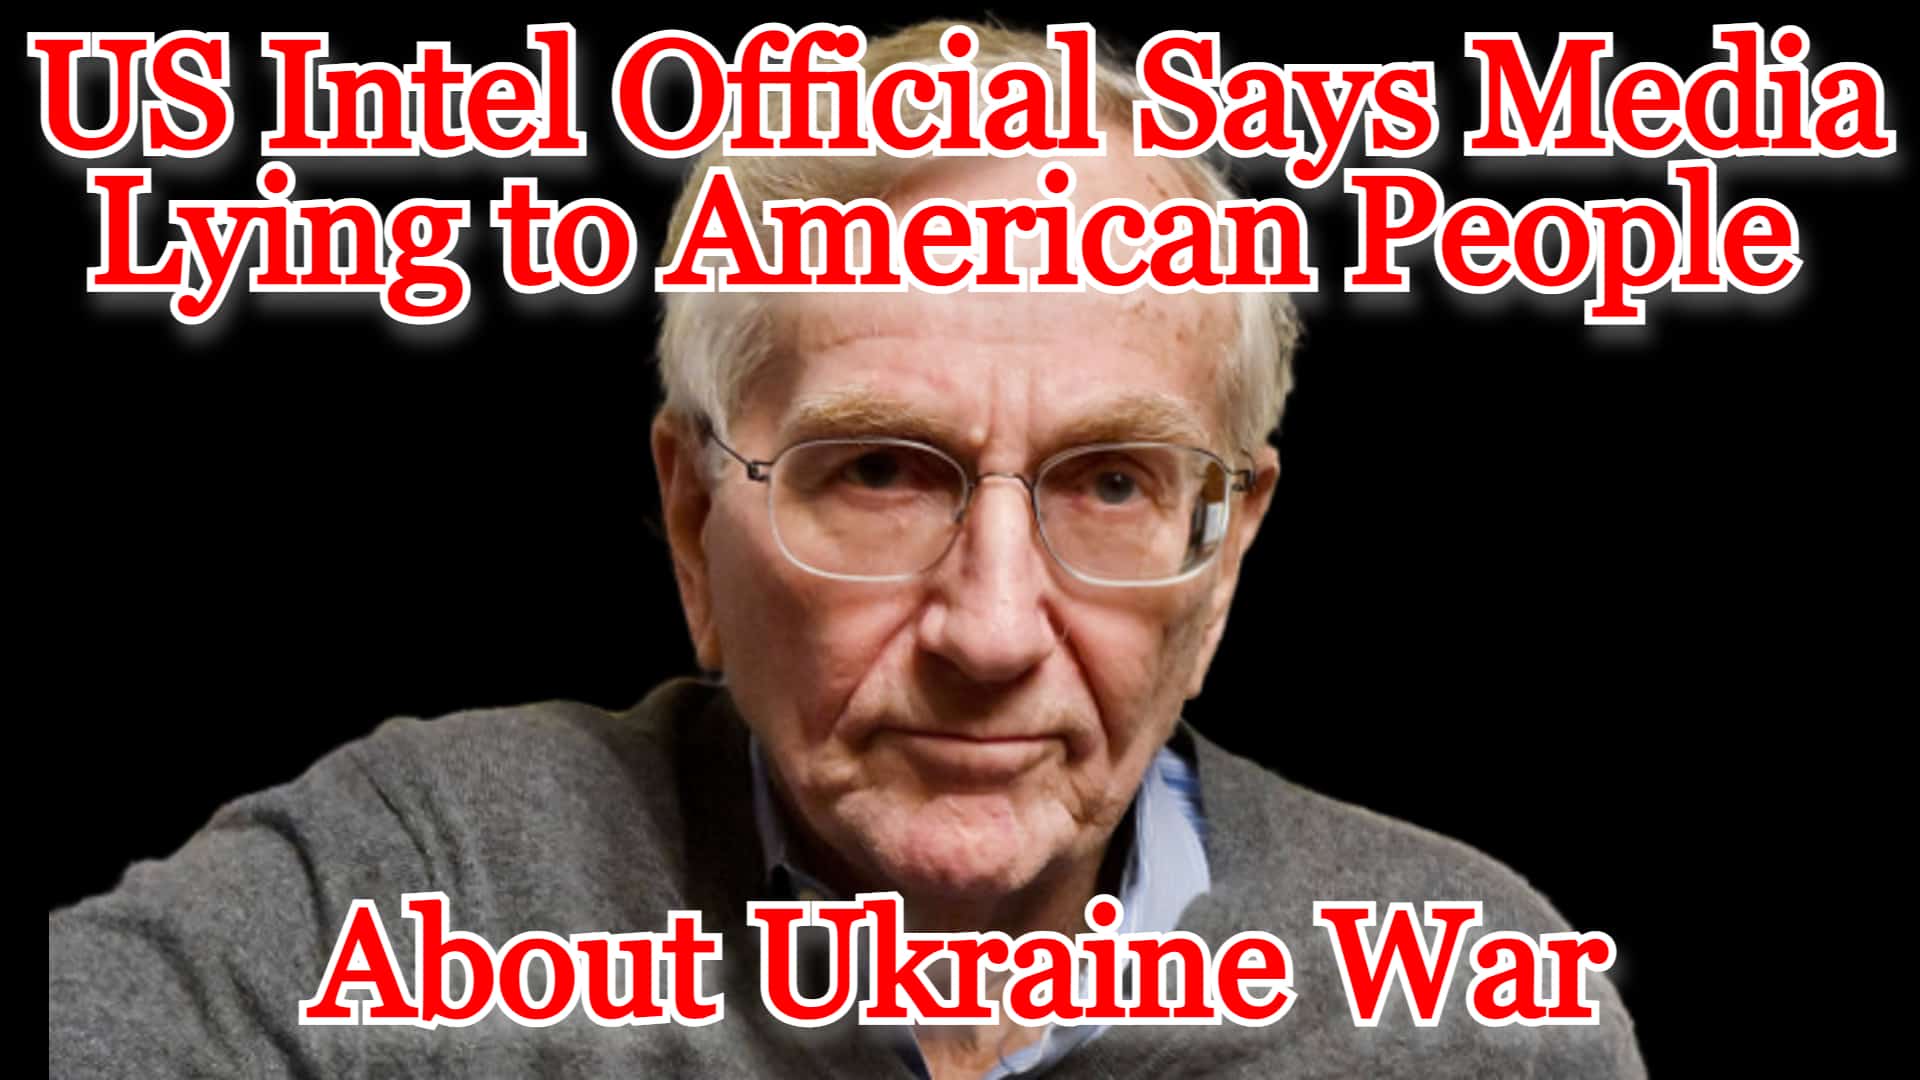 COI #469: US Intel Official Says Media Lying to American People About Ukraine War